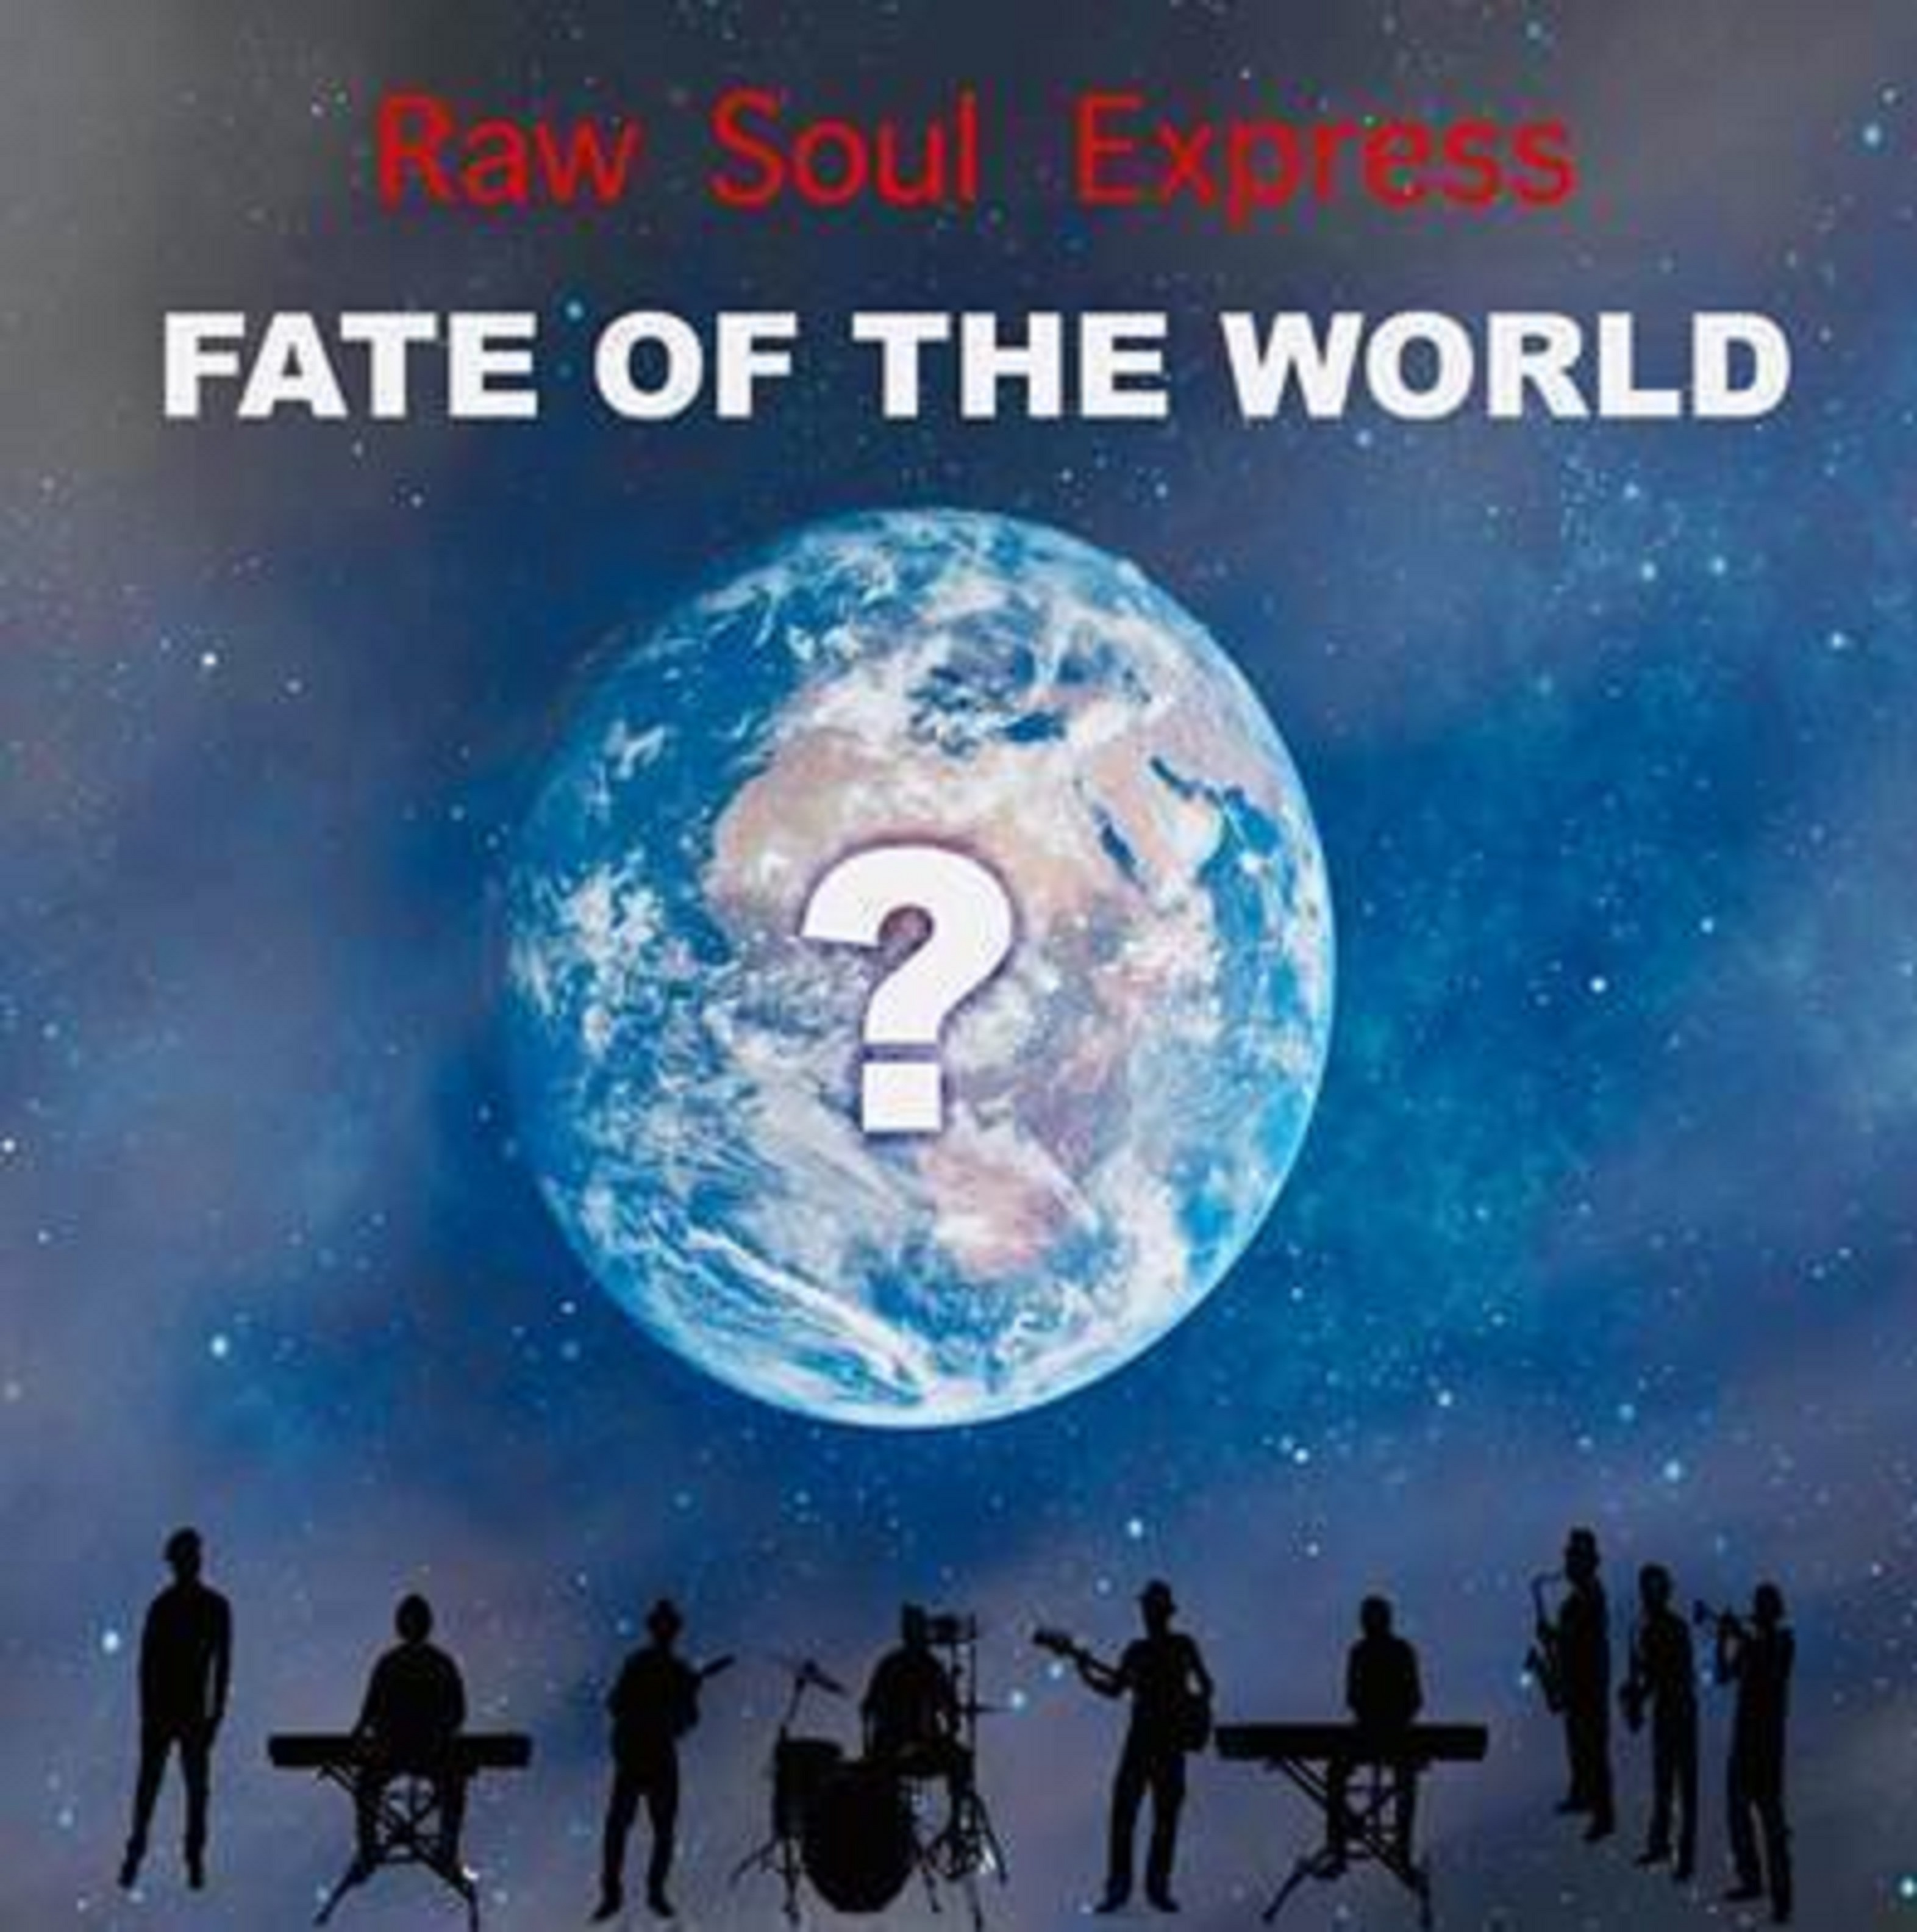 Raw Soul Express Return with New Single Fate of the World